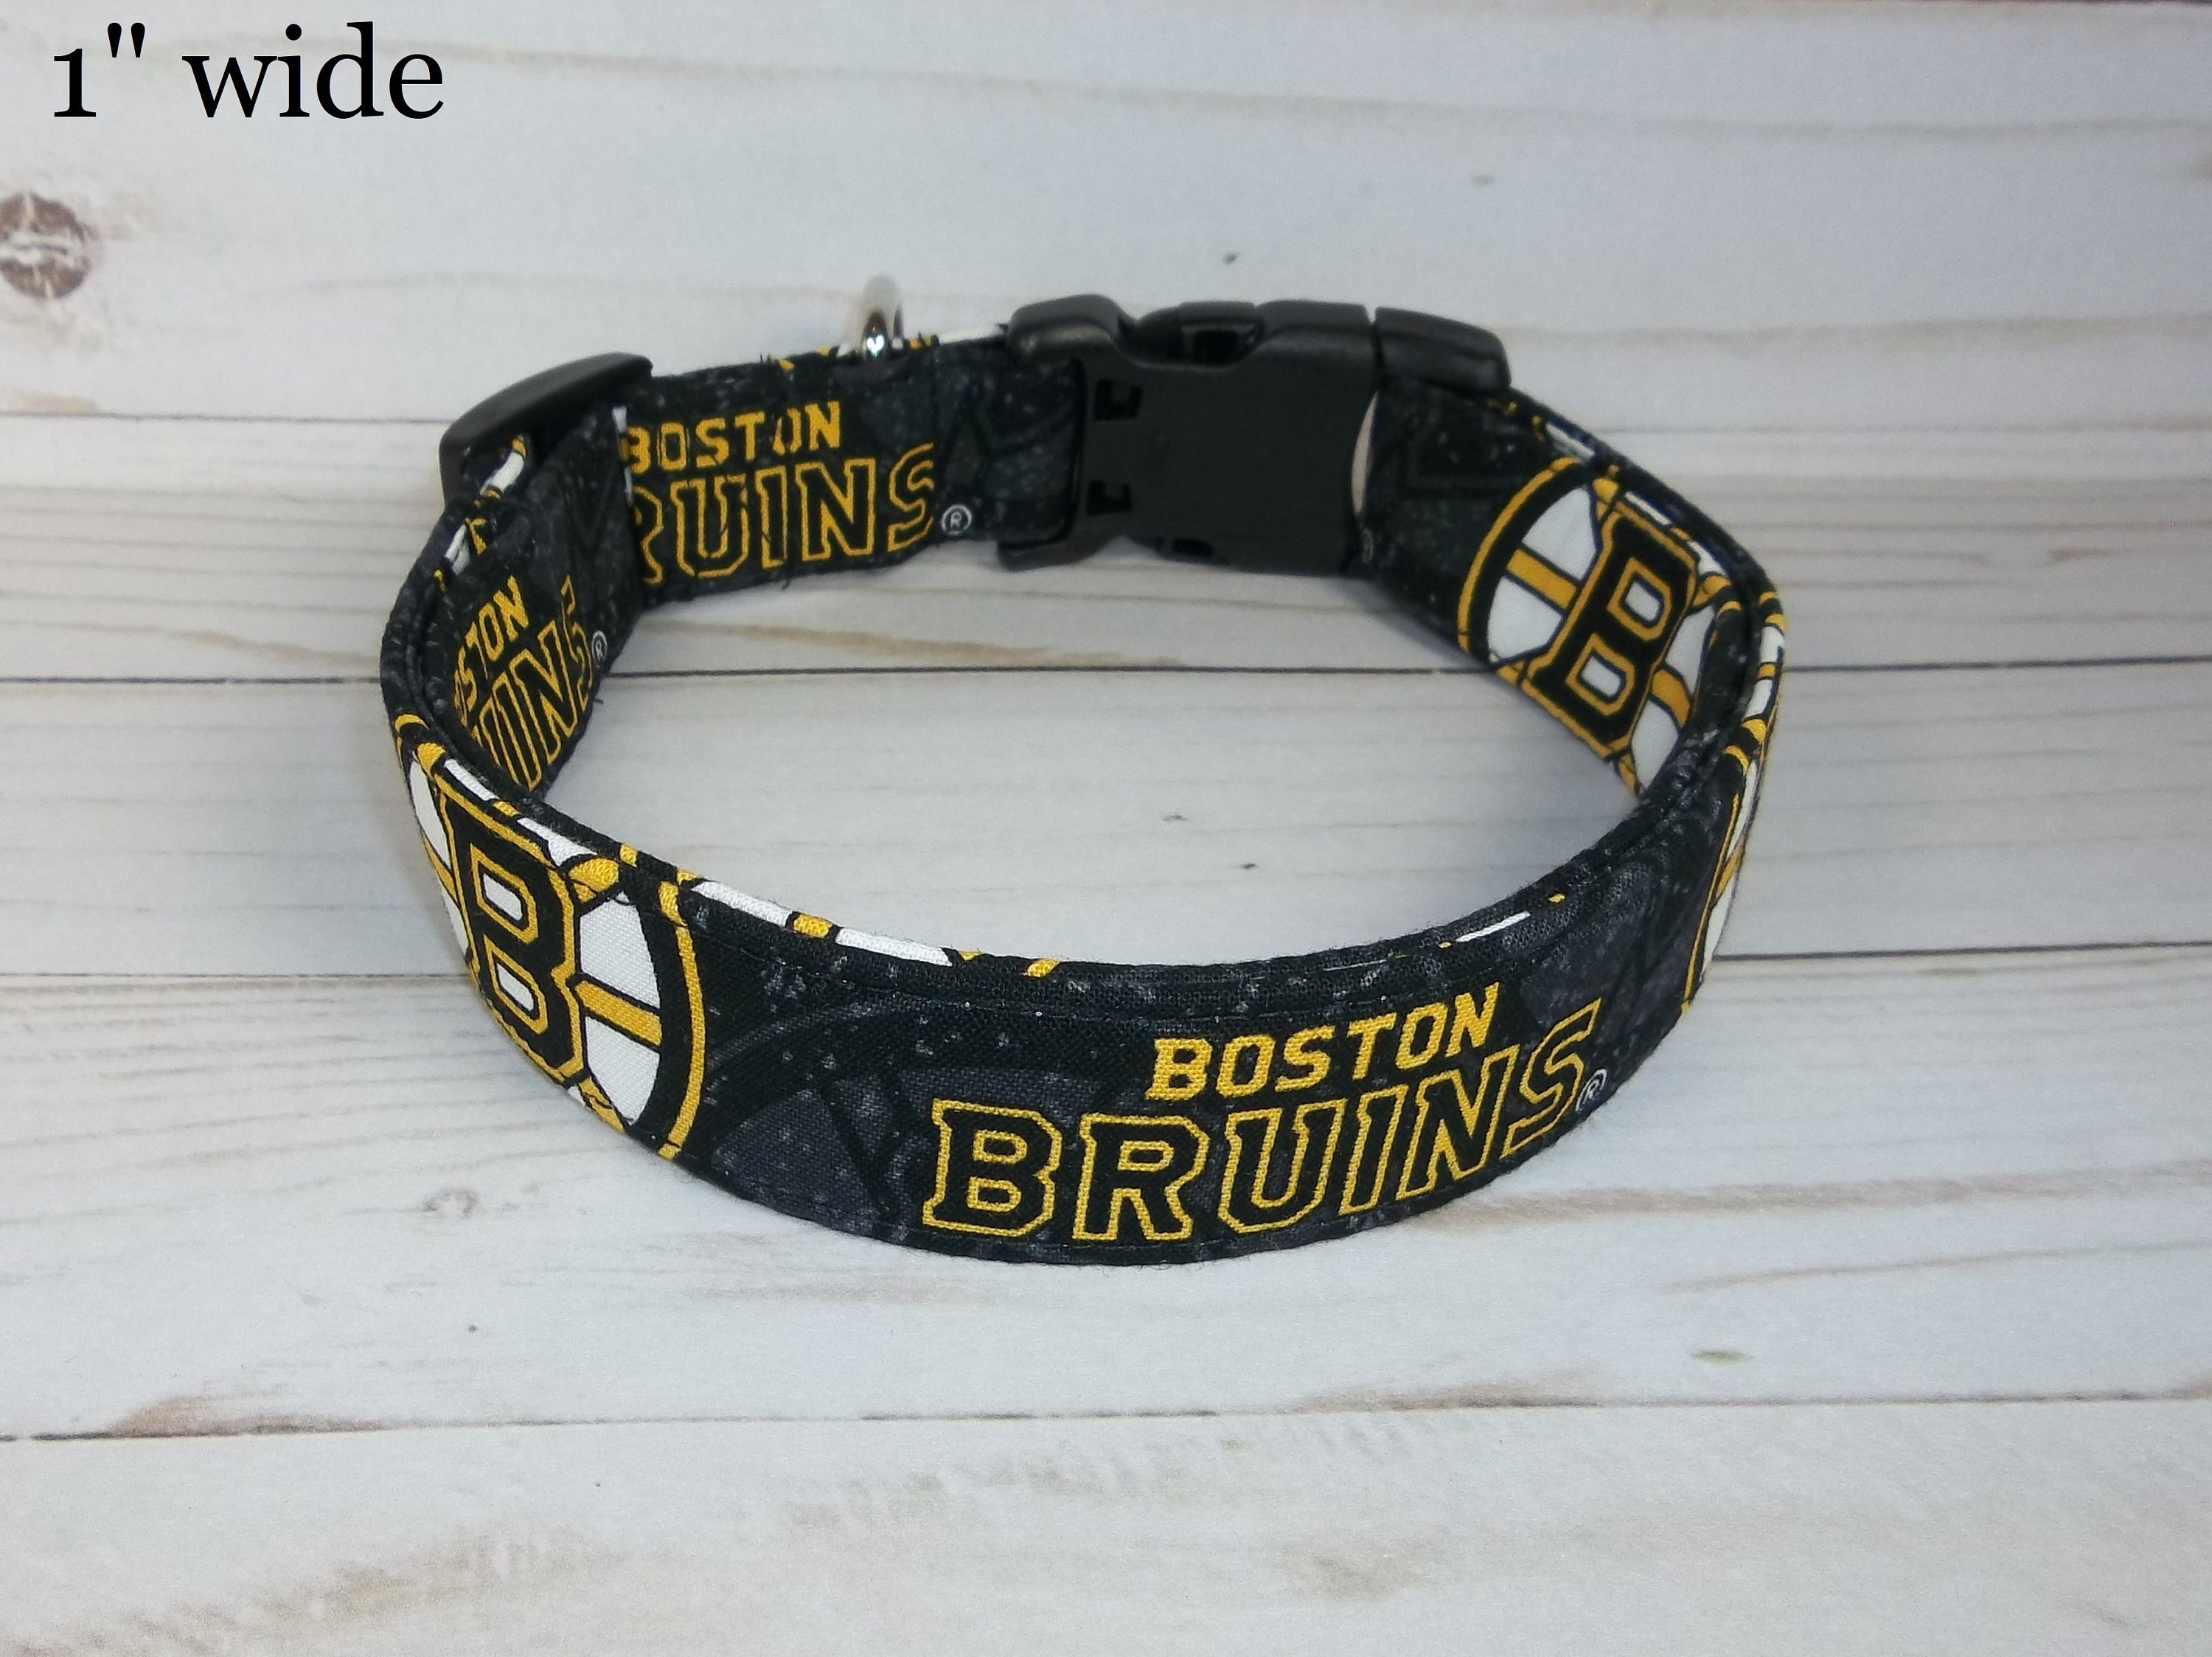 Pets First Boston Bruins Pet Jersey - XS for sale online